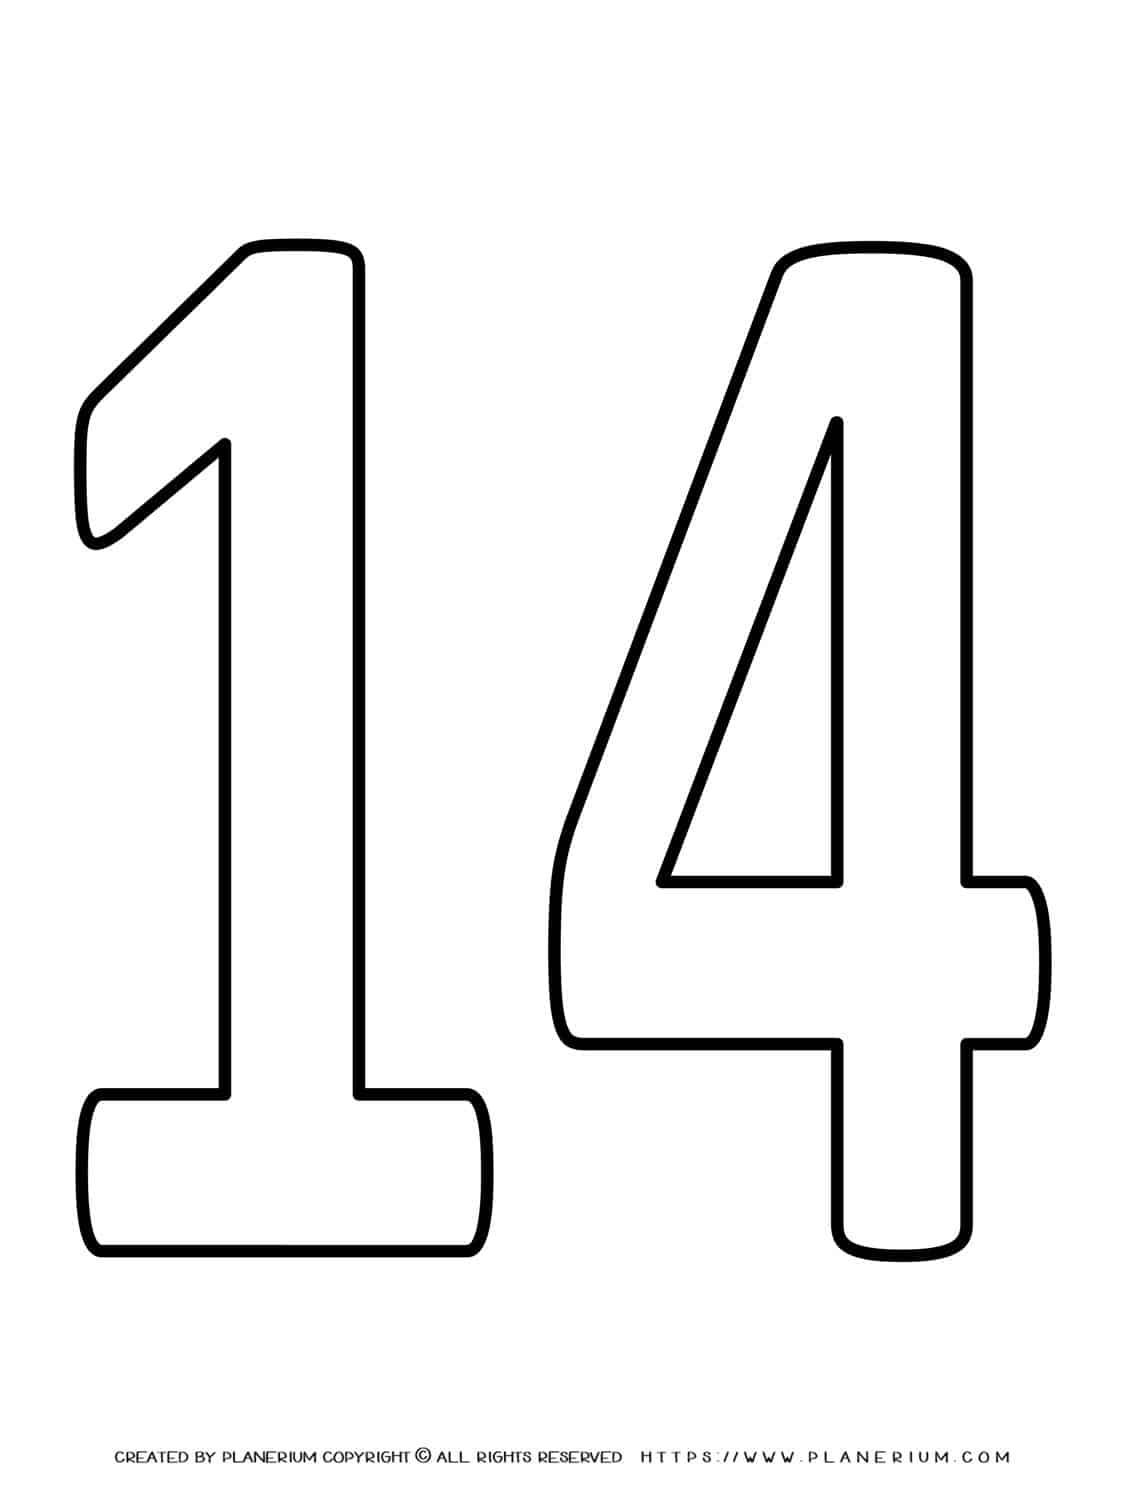 number 14 clipart